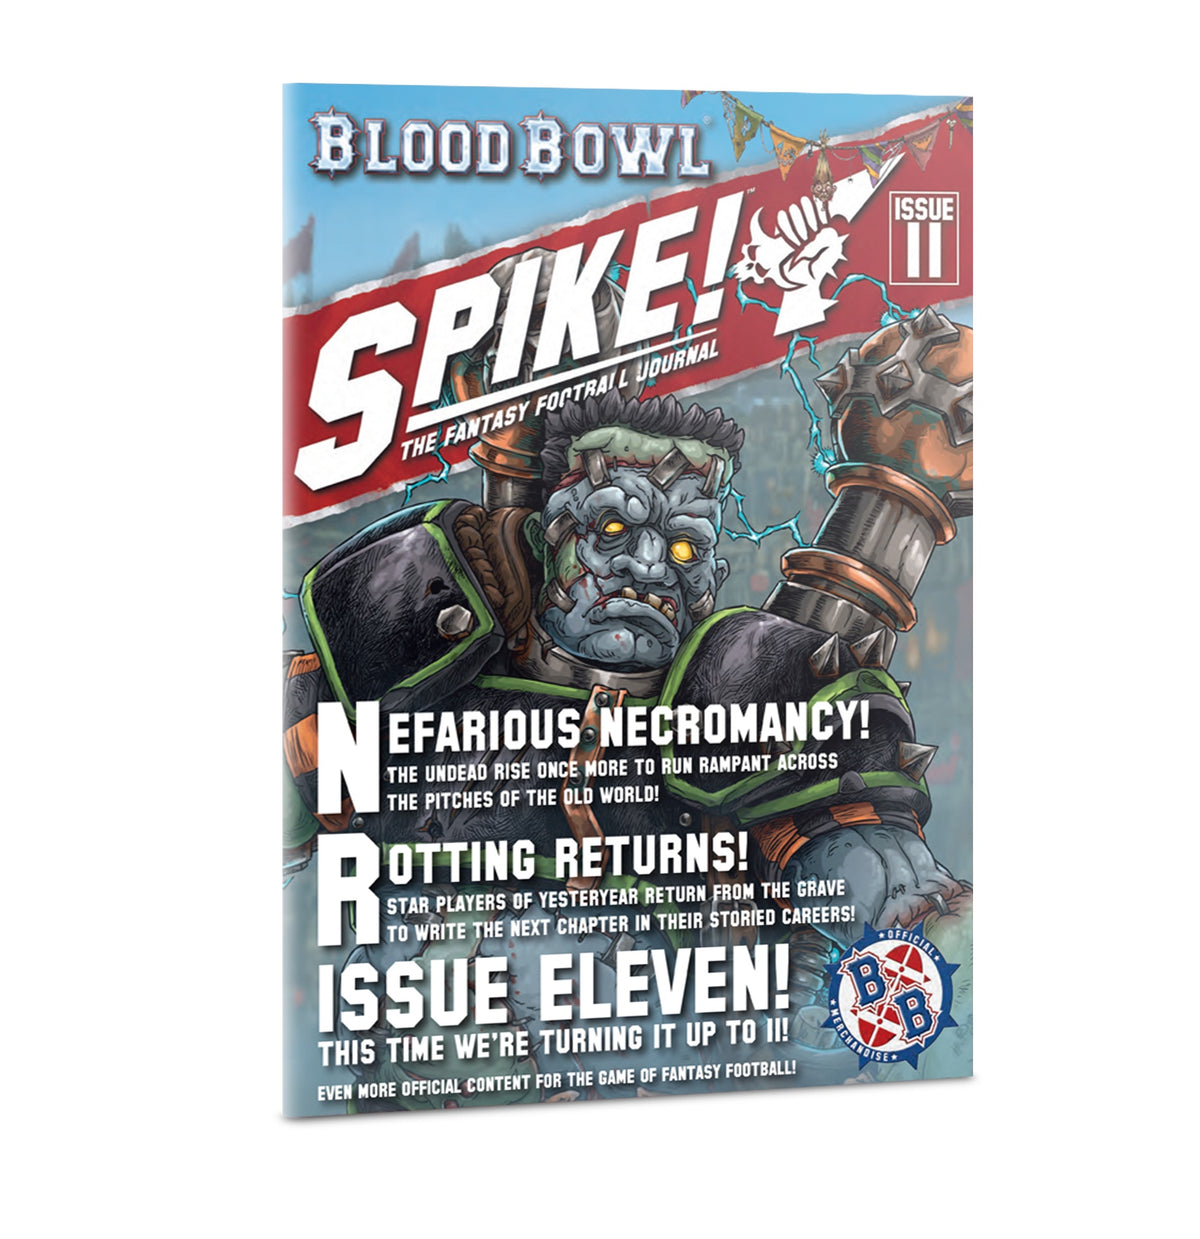 Blood Bowl: Spike Journal Issue 11